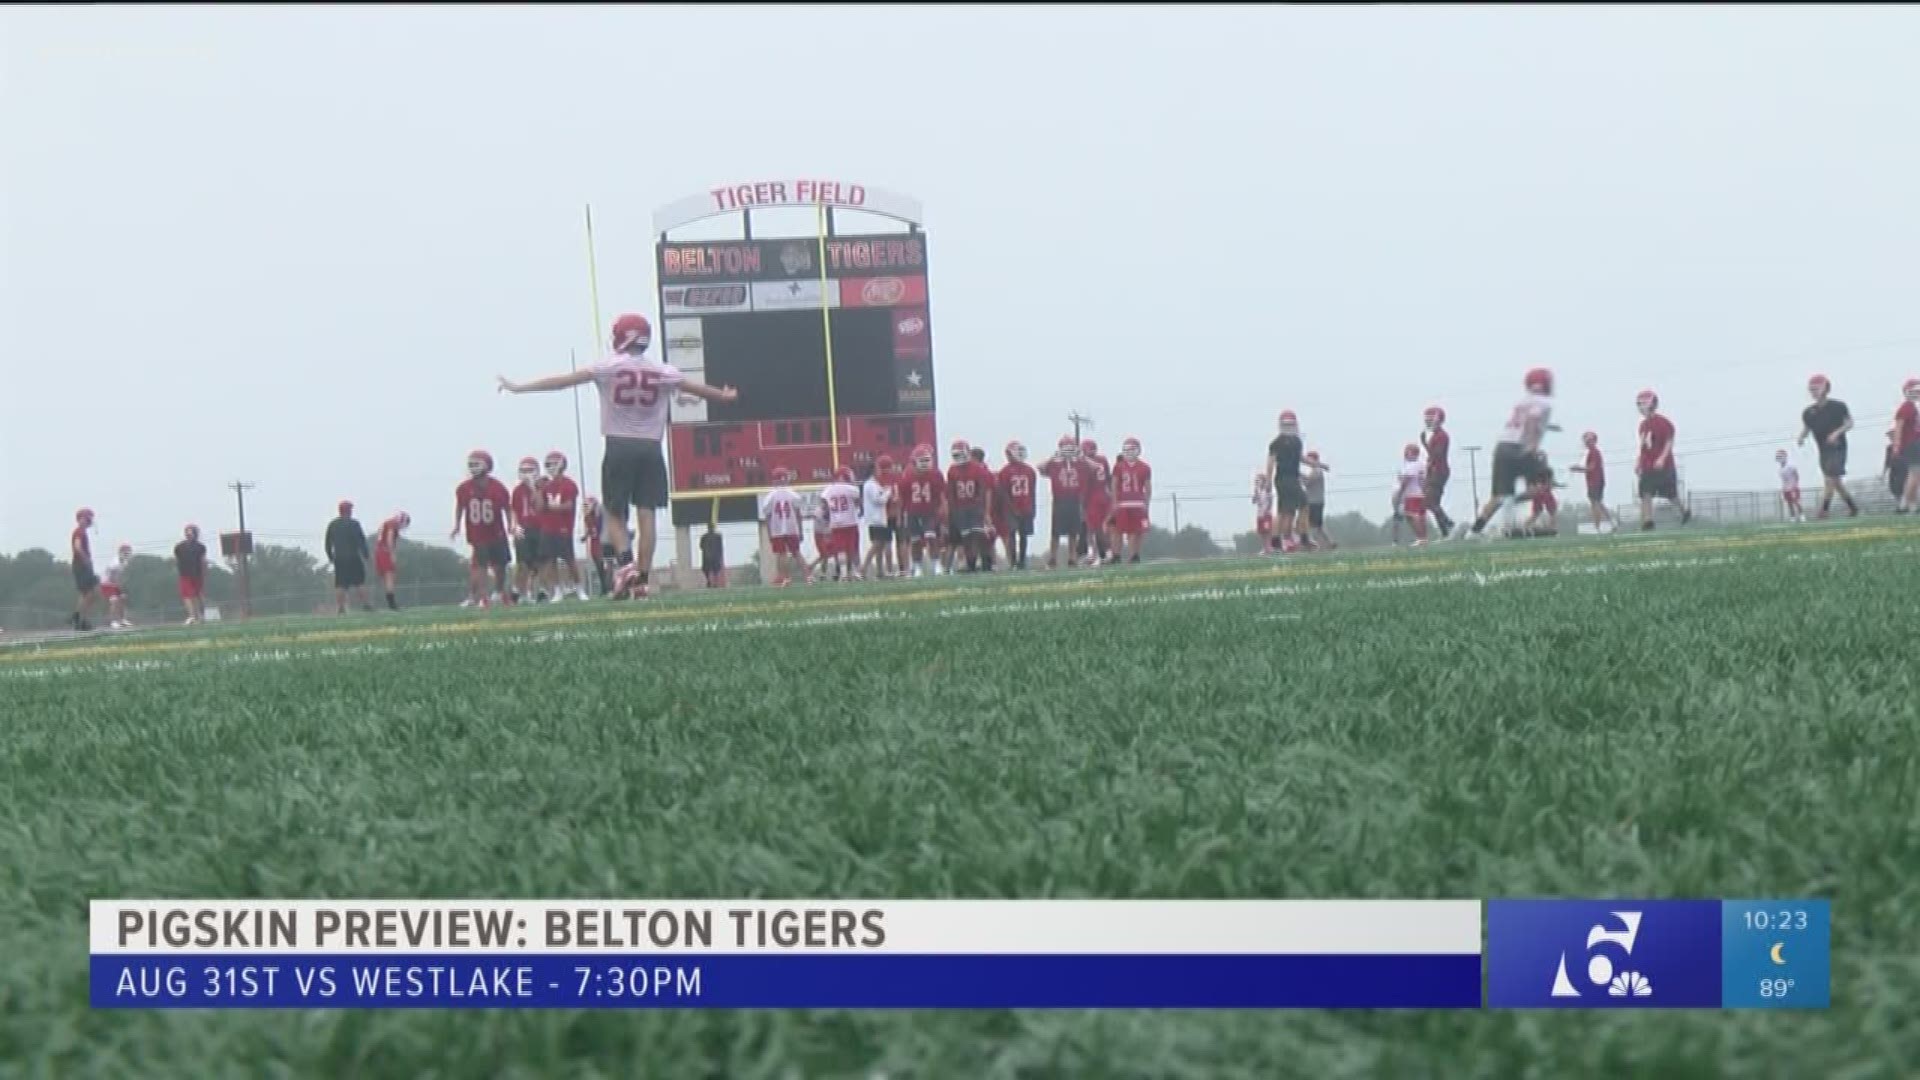 Pigskin Preview: Belton Tigers